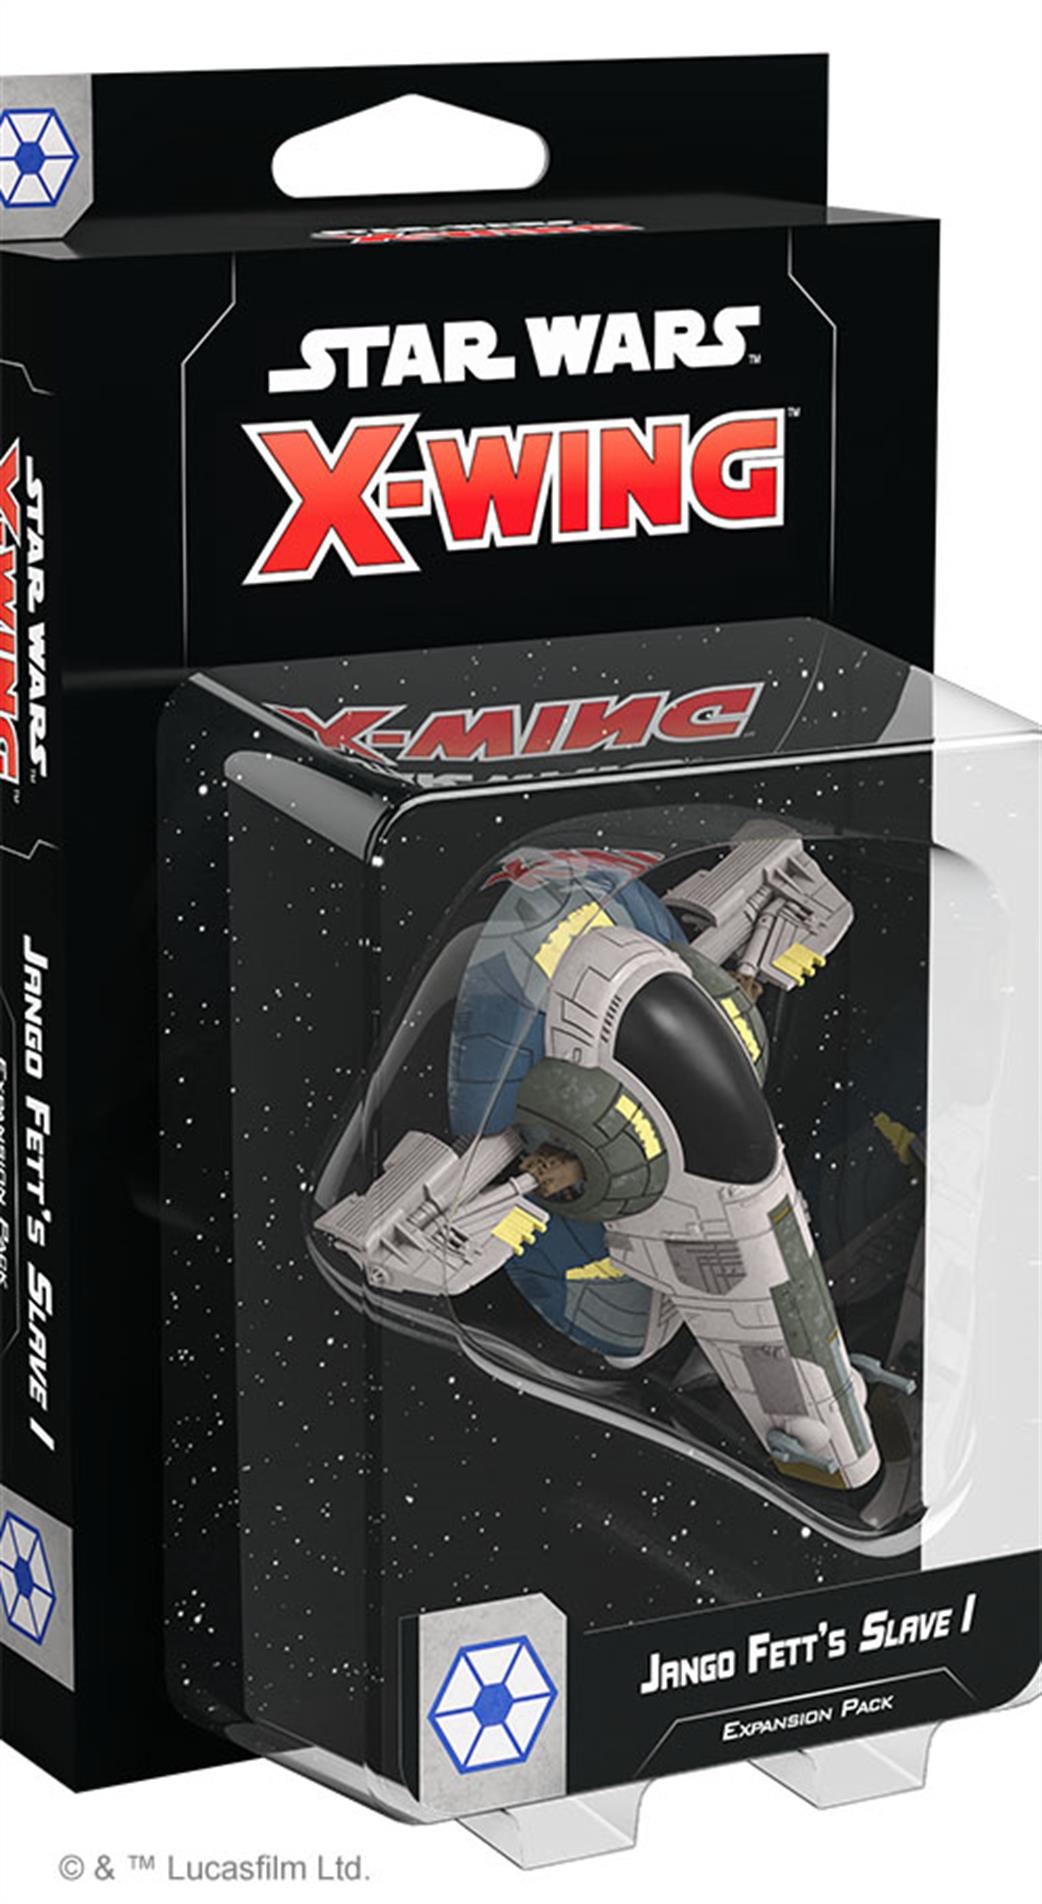 Fantasy Flight Games  SWZ82 Jango Fett's Slave 1 Expansion Pack from Star Wars X-Wing 2nd Ed